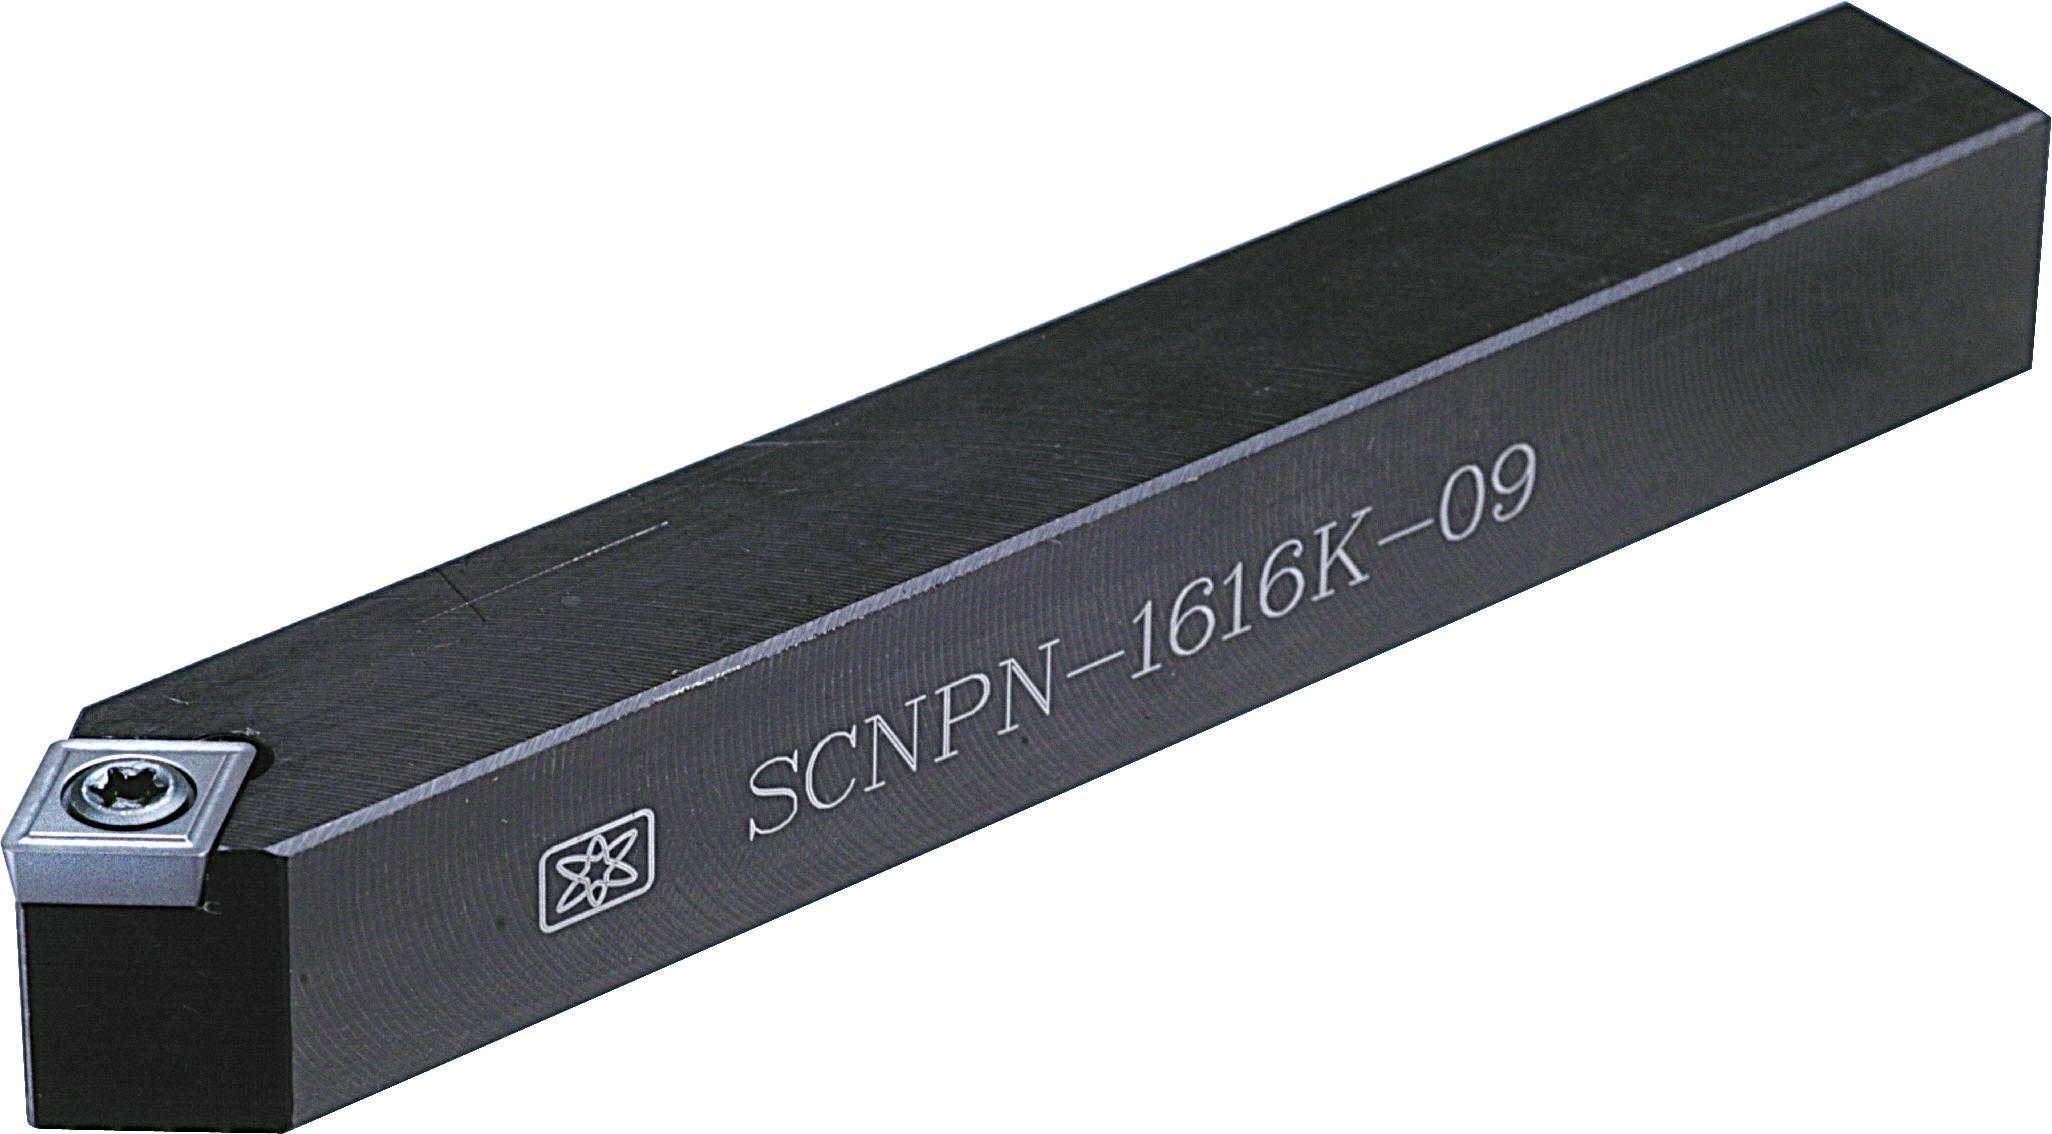 Products|SCNPN (CP..0903..) External Turning Tool Holder